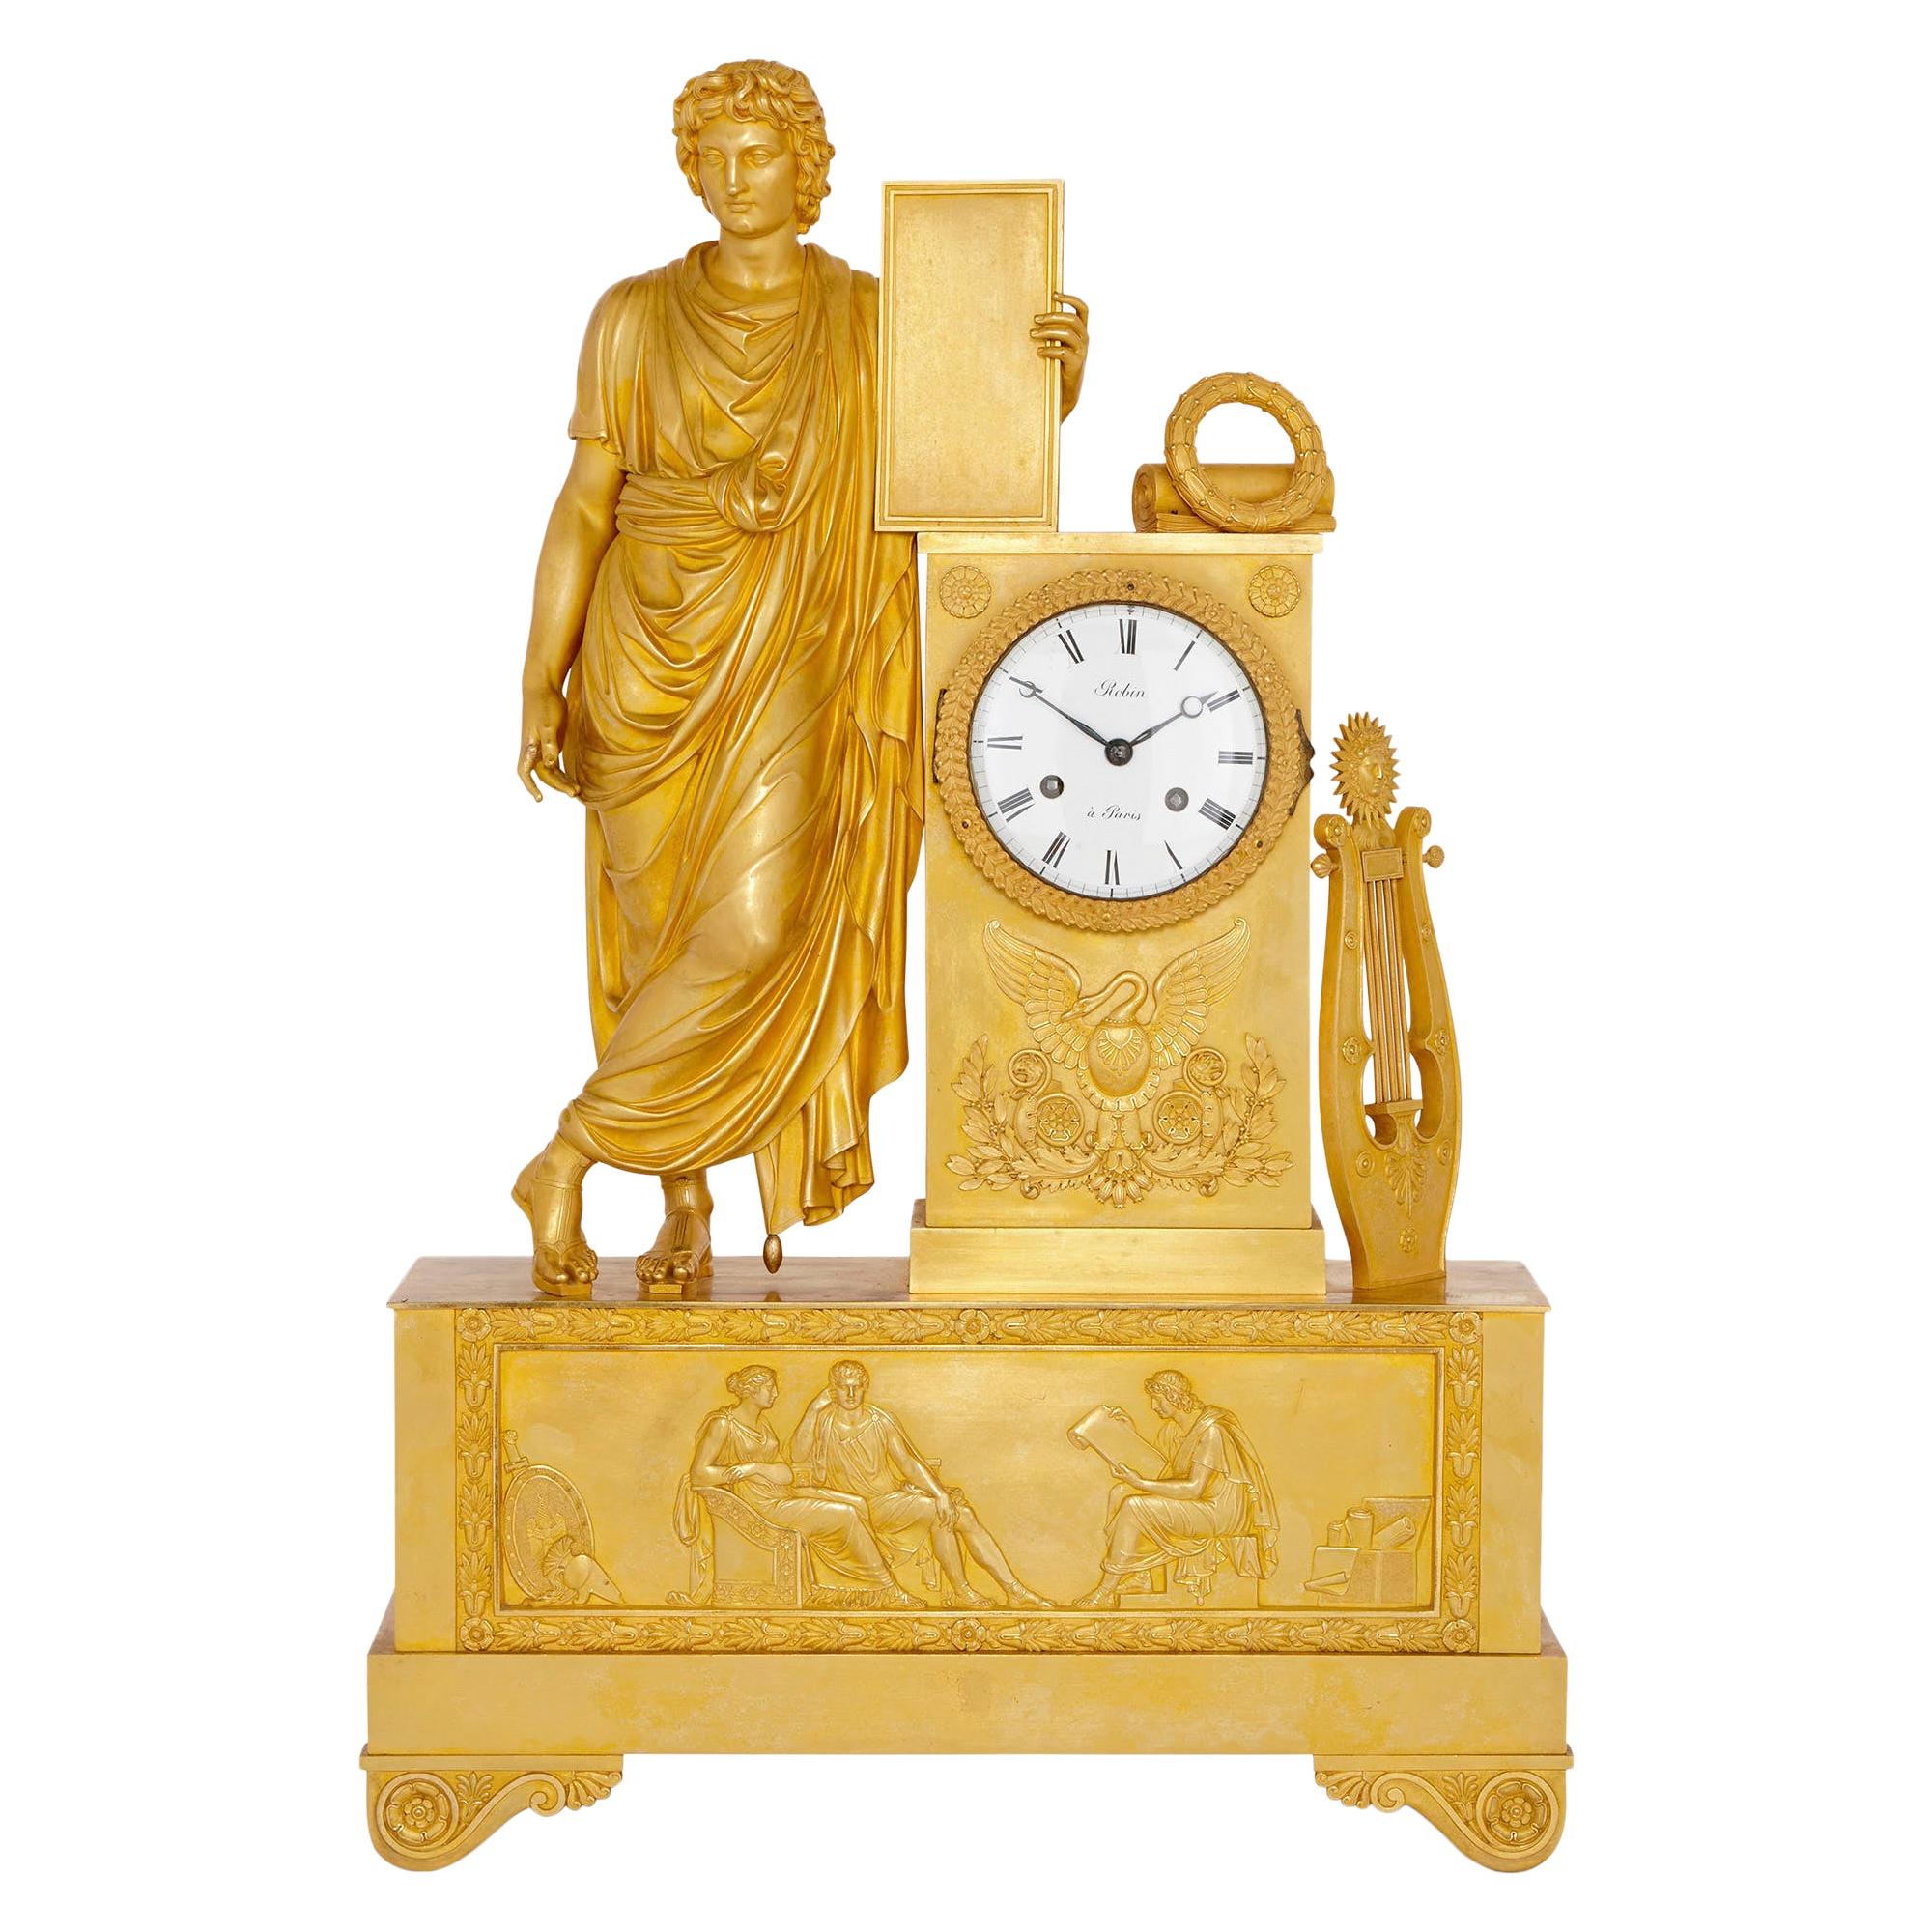 Antique French Neoclassical Style Ormolu Mantel Clock